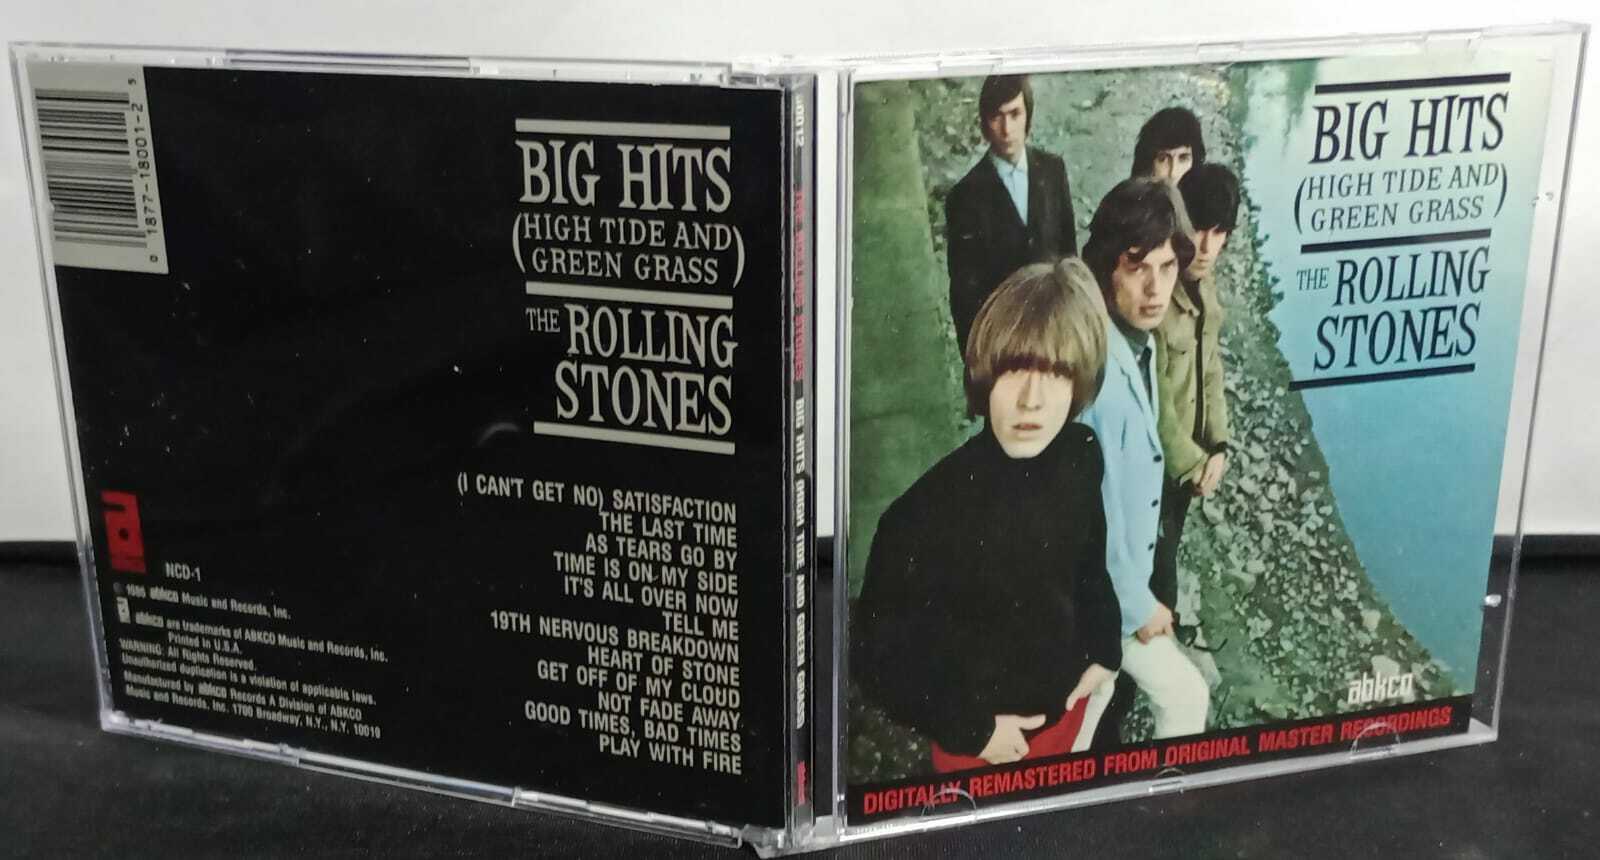 CD - Rolling Stones The - Big Hits - High Tide And Green Grass (USA)